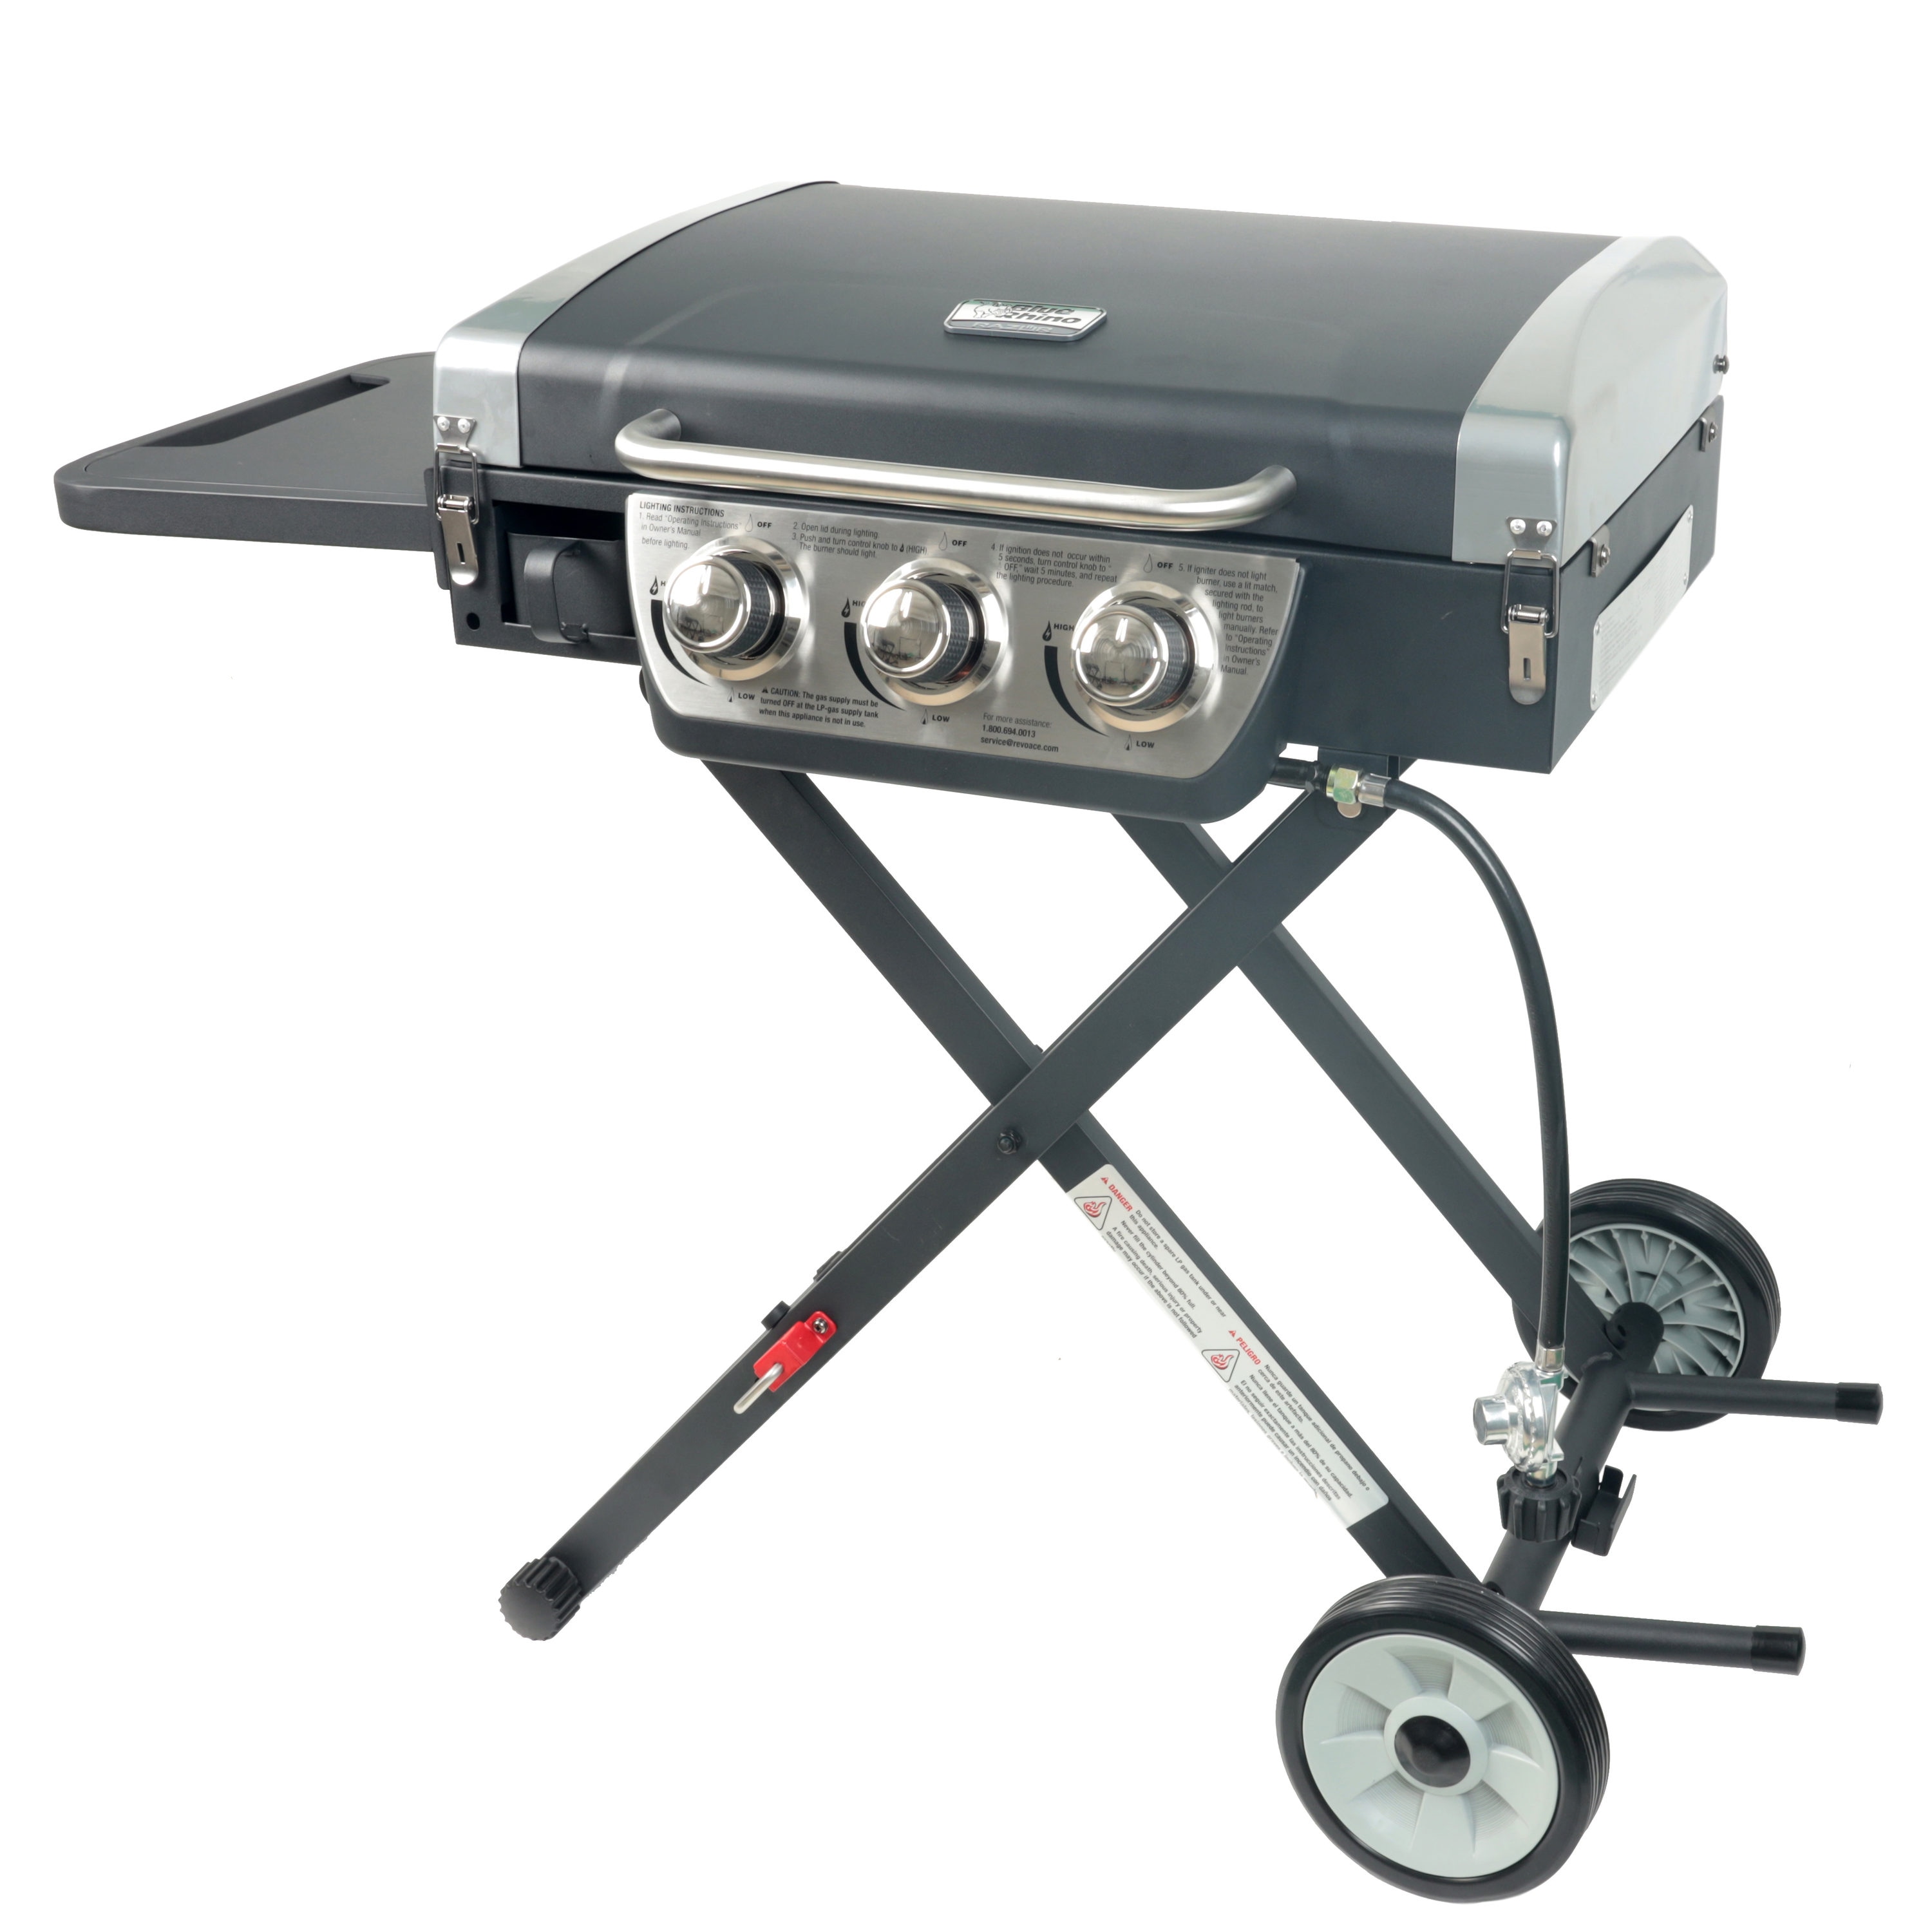 2 Burner Portable Stainless Steel BBQ Table Top Grill for Outdoors - 22 x 18 x 15 (L x W x H) - Assembly Required